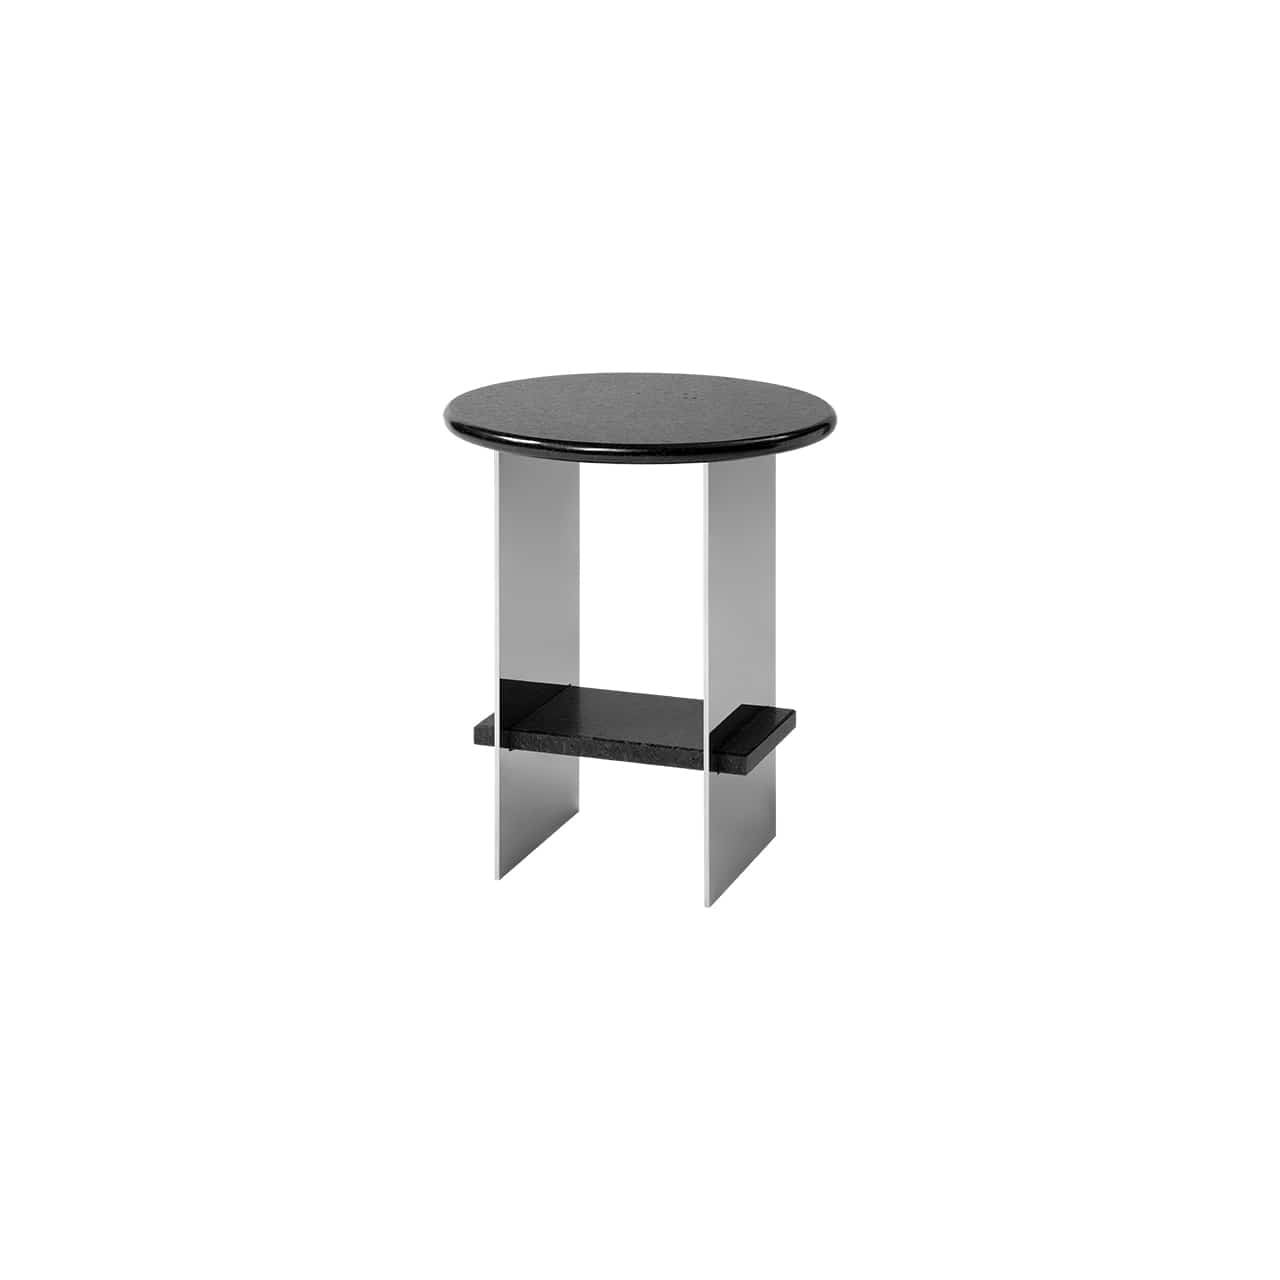 BLACK STONE SIDE TABLE